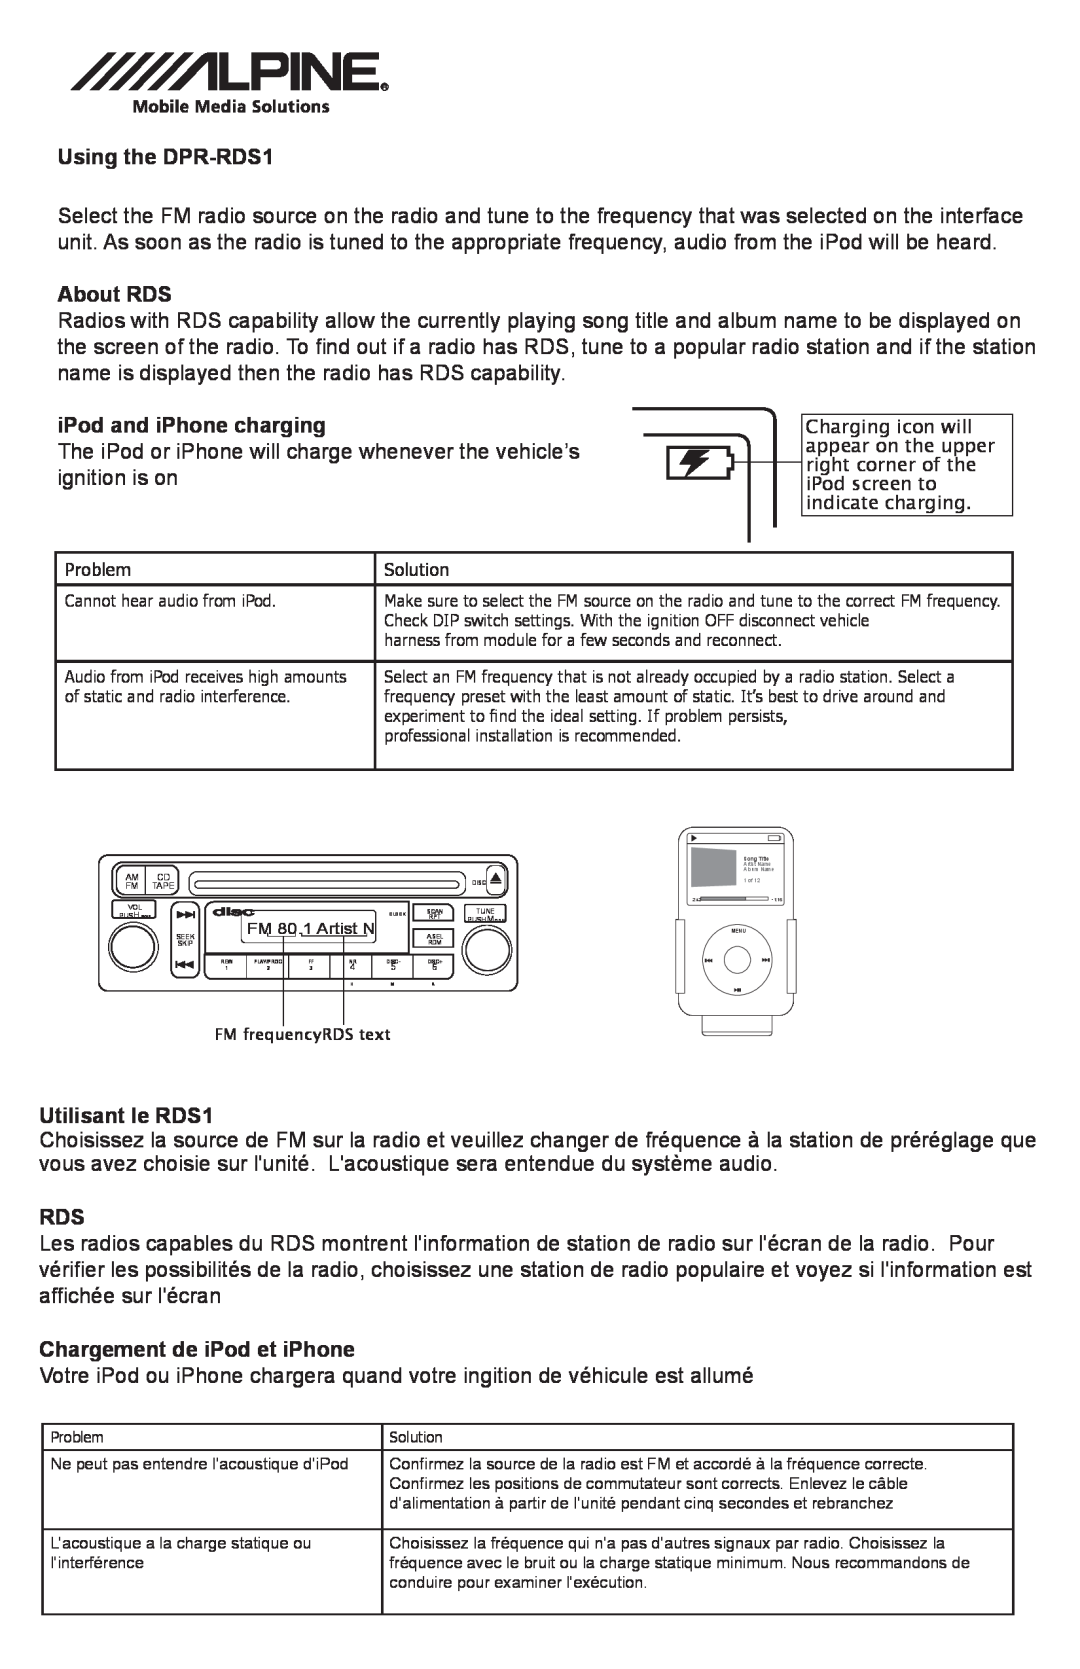 Alpine manual Using the DPR-RDS1, About RDS, iPod and iPhone charging, Utilisant le RDS1, Chargement de iPod et iPhone 